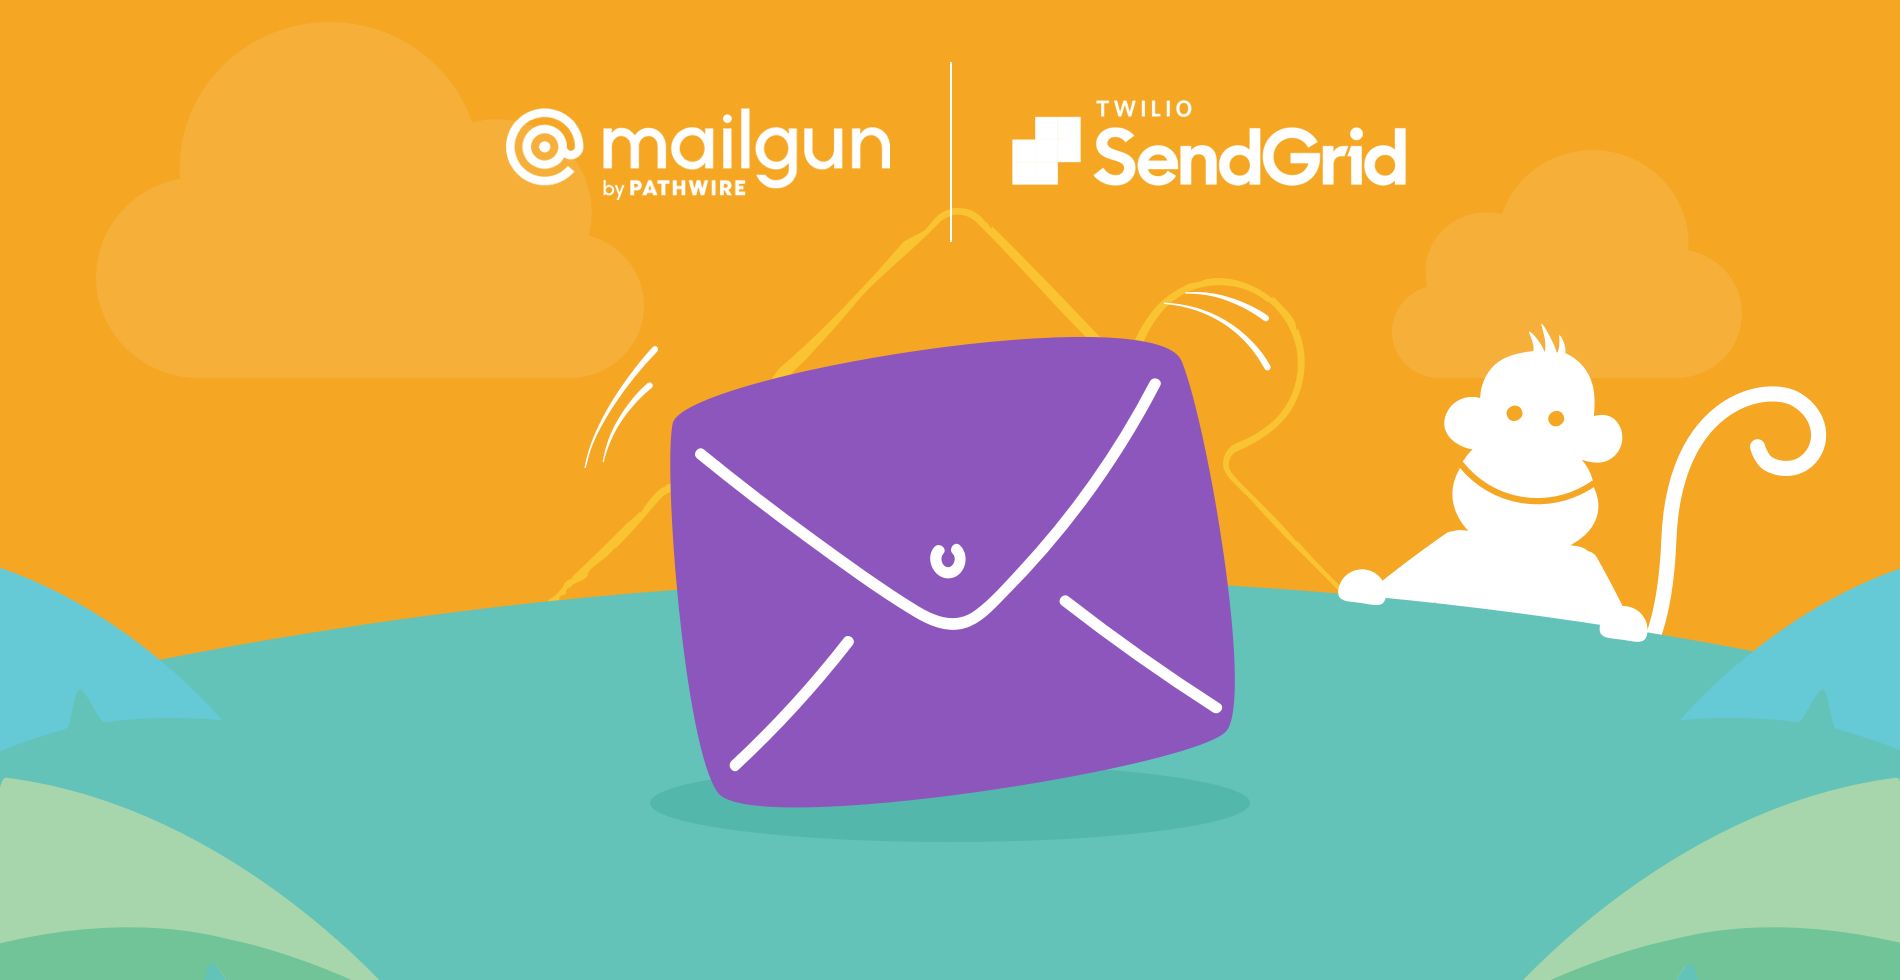 Send customer facing emails from your own email address via Mailgun or SendGrid